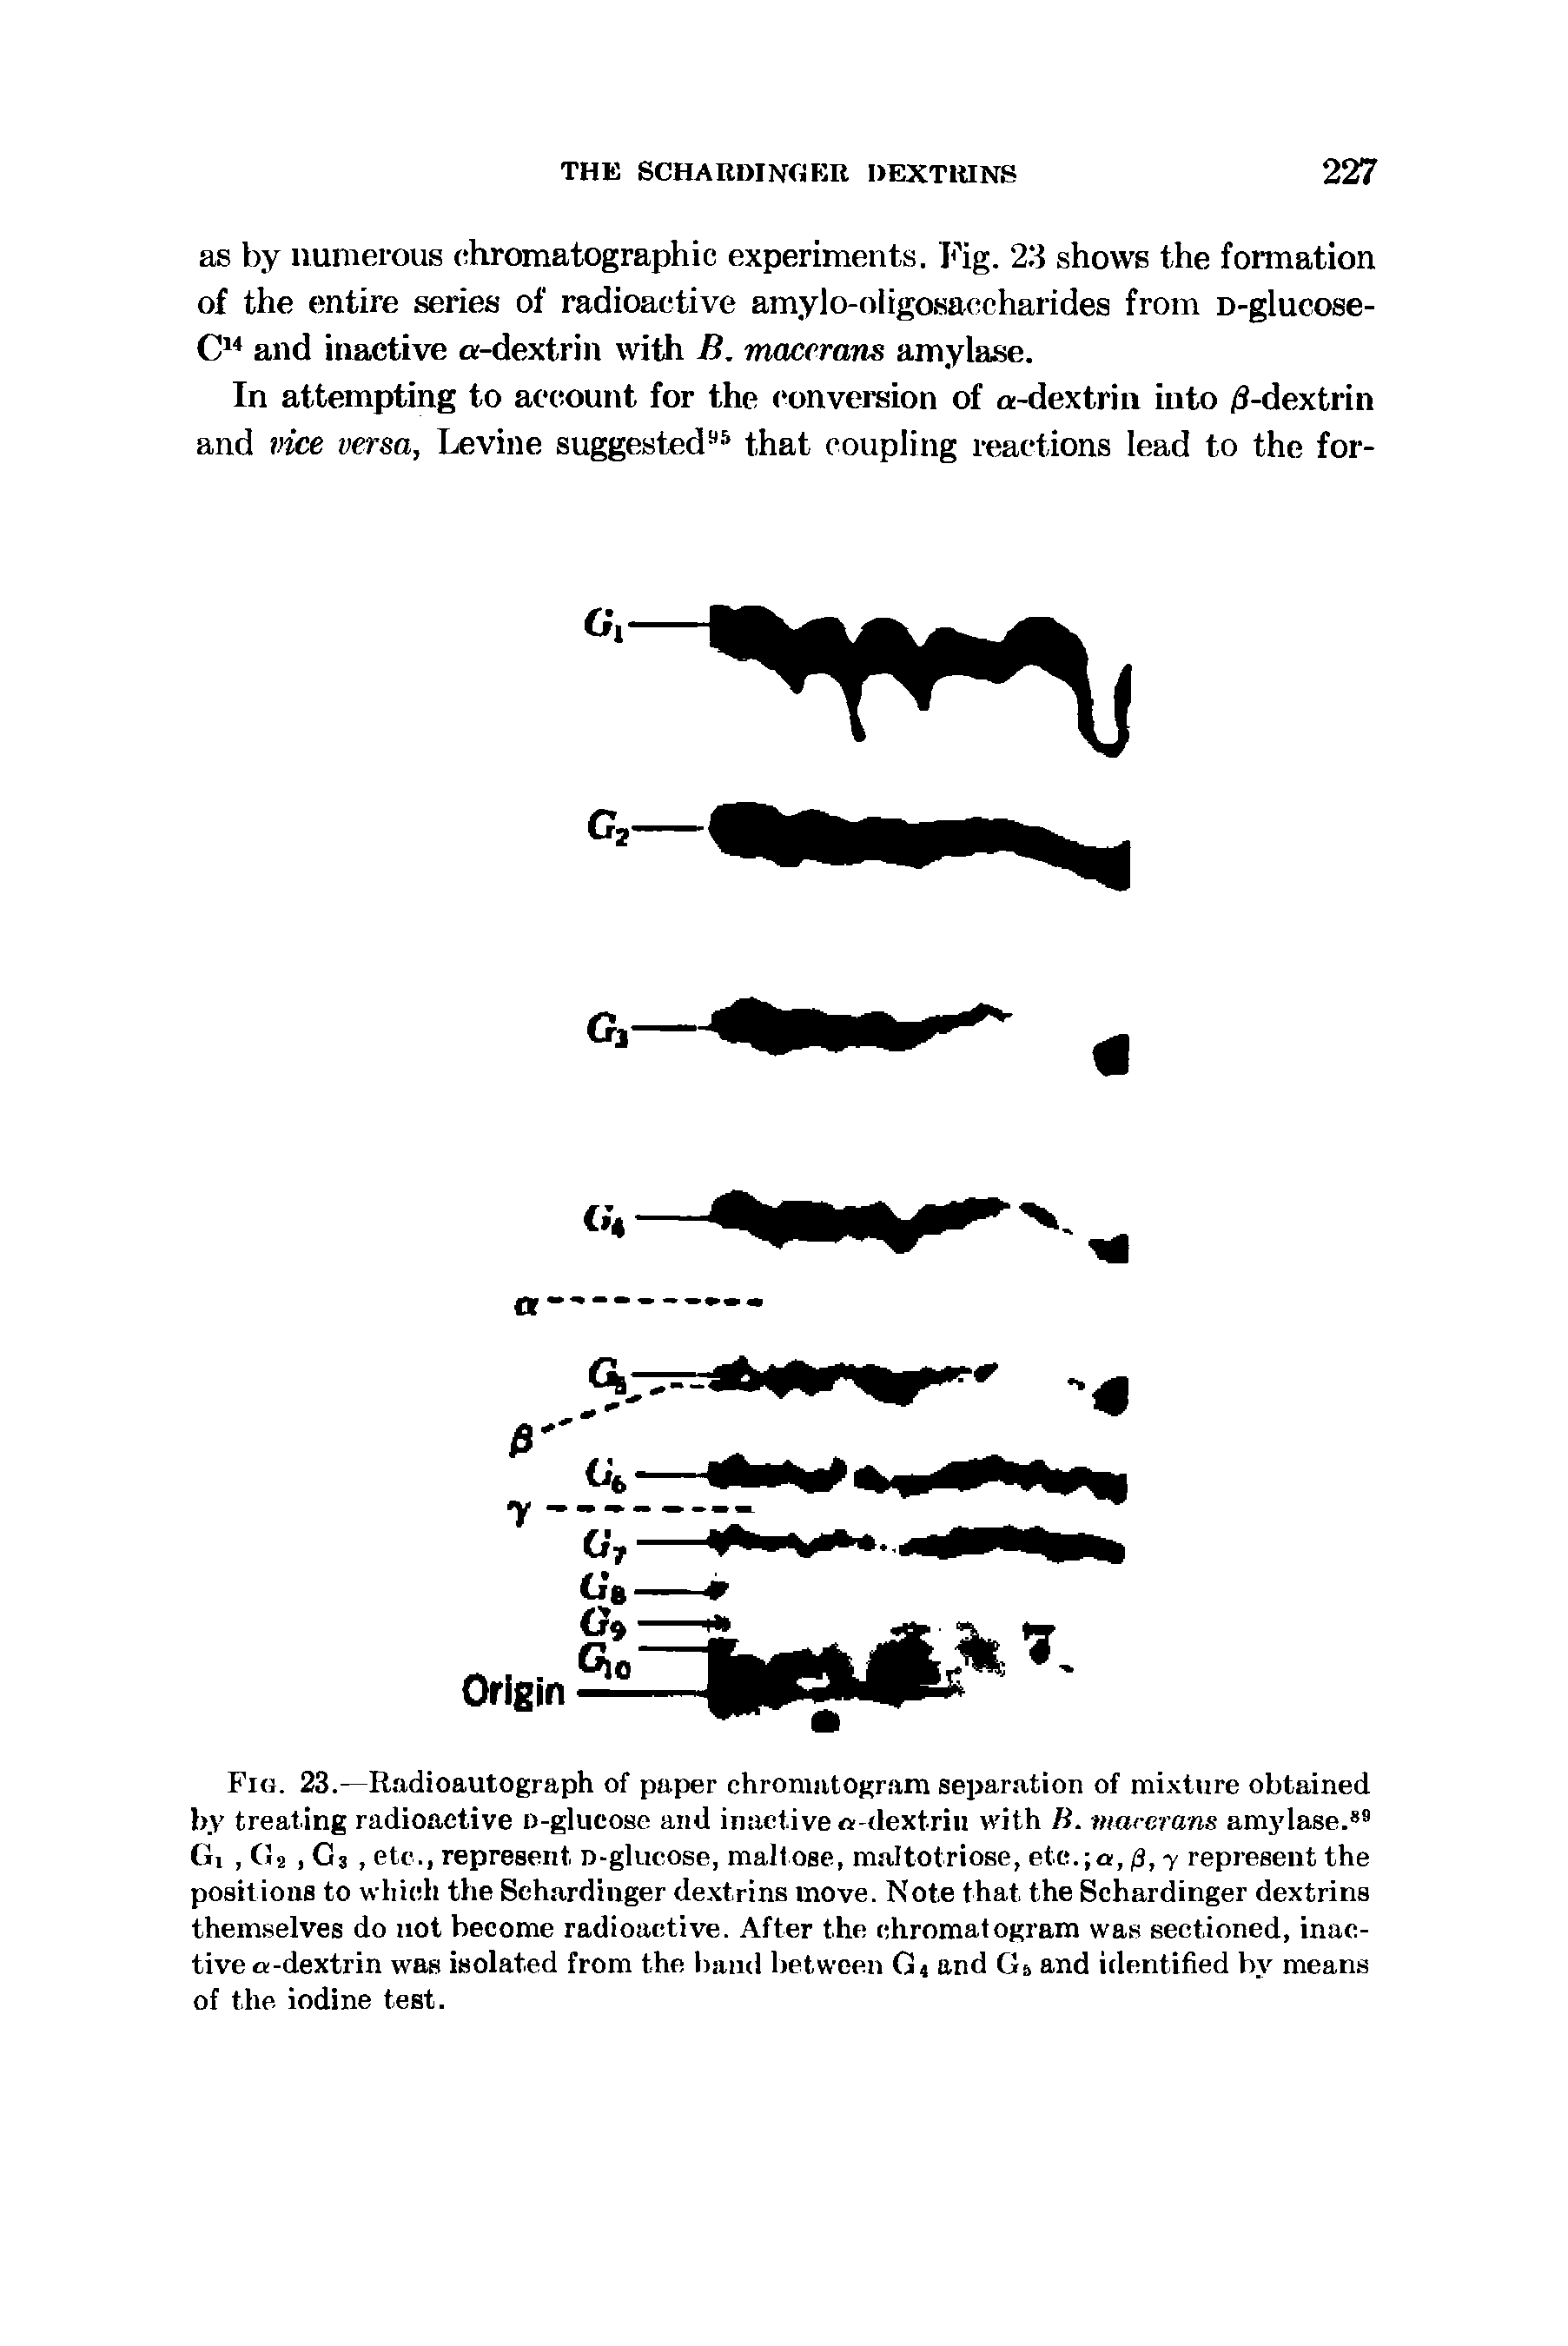 Fig. 23.—Radioautograph of paper chromatogram separation of mixture obtained by treating radioactive n-gliicose and inactive dextriii with R. marcrans amylase. Gi, Ga, Os, etc., represent n-glucose, maltose, maltotriose, etc. a, 0, y represent the positions to wliicdi the Sehardinger dextrins move. Note that the Schardinger dextrins them.selves do not become radioactive. After the chromatogram was sectioned, inactive a-dextrin was isolated from the band between G4 and Gs and identified by means of the iodine test.